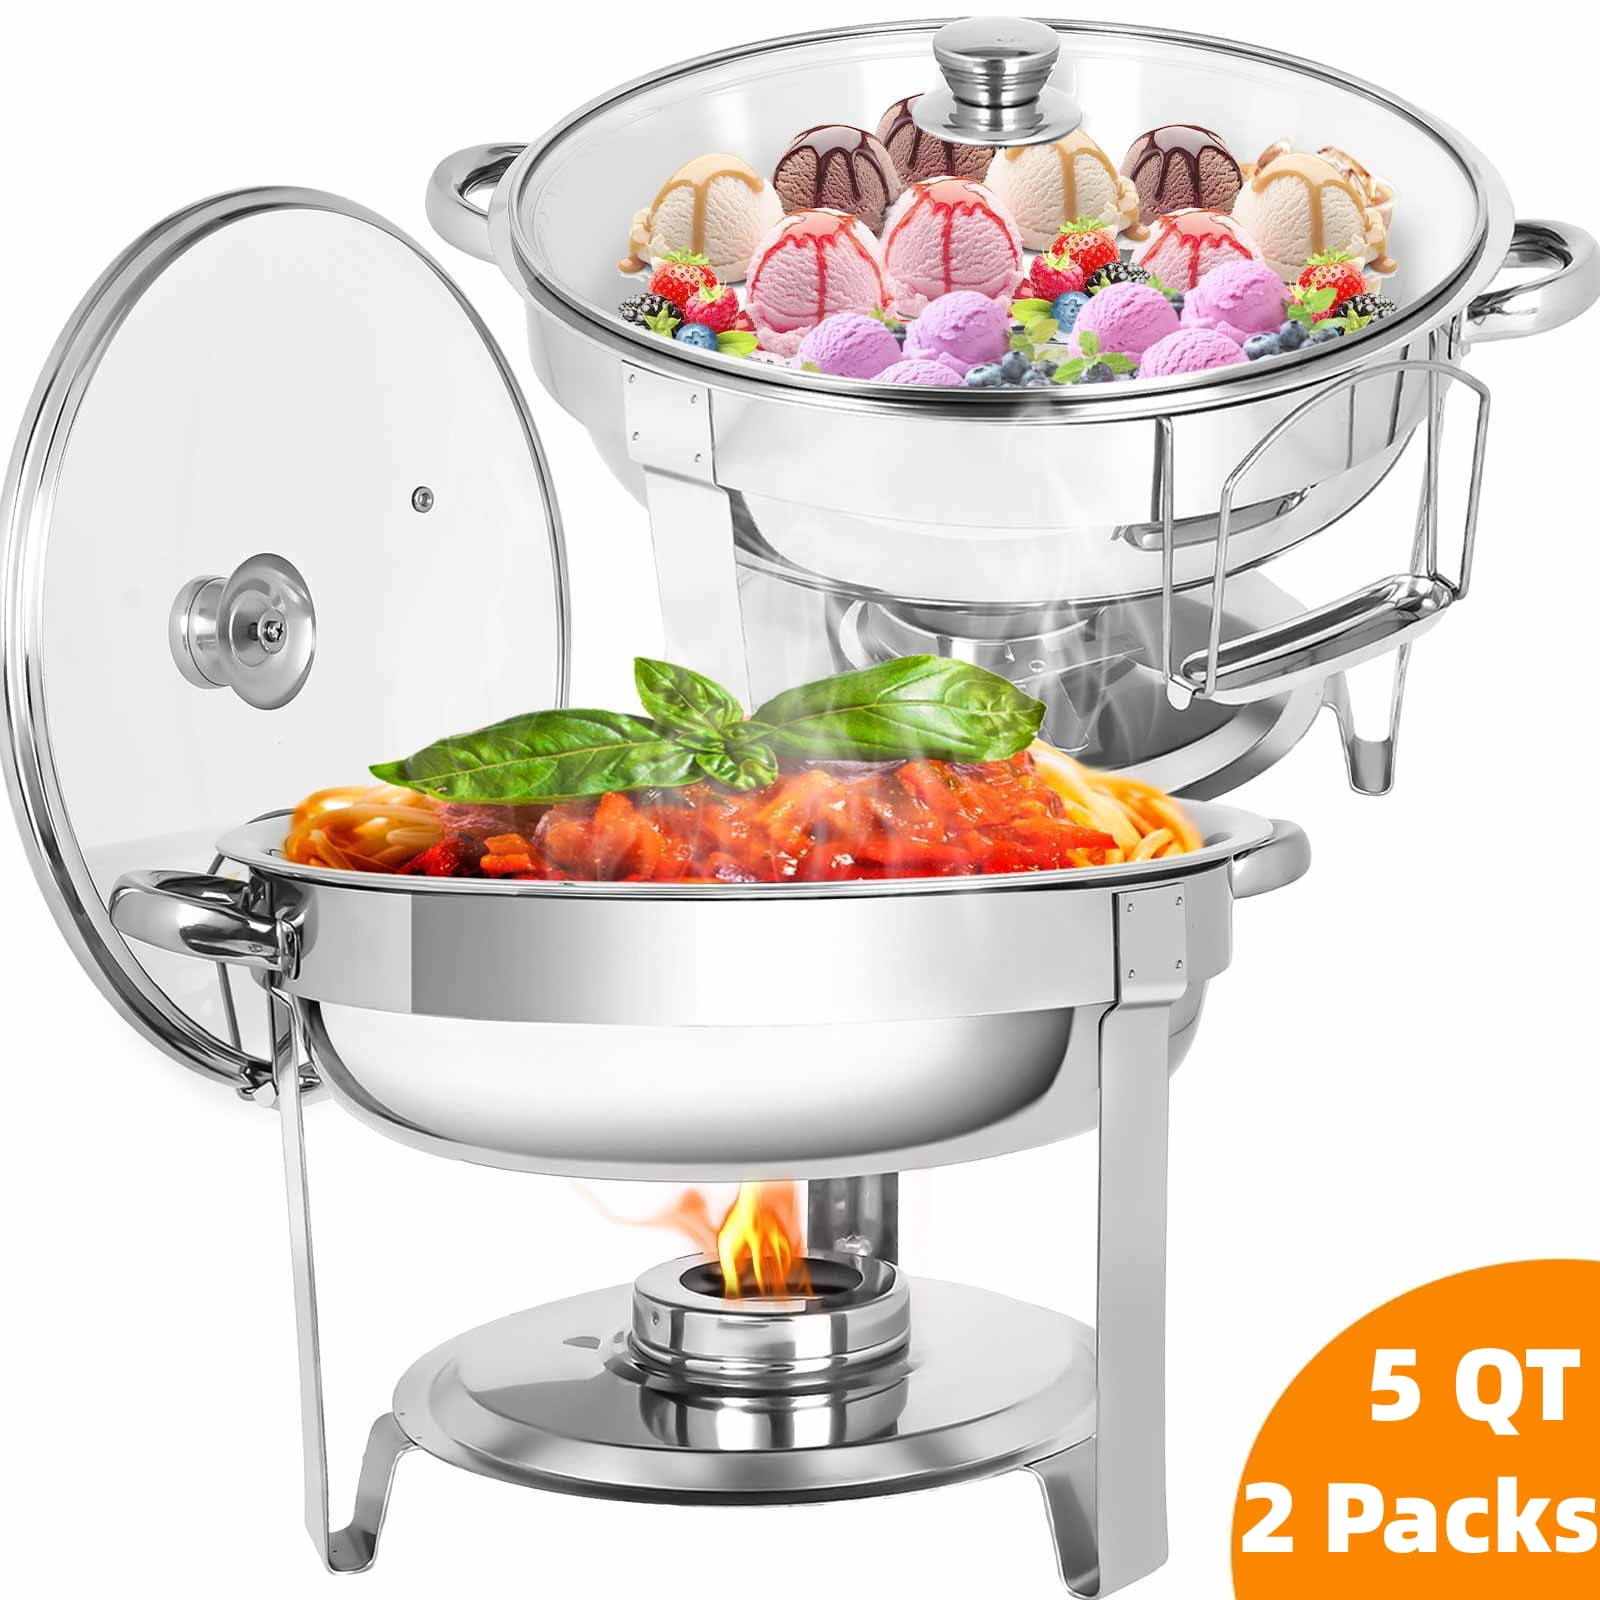 Firstness Chafing Dish Buffet Set 2 Pack,5 QT Round Chafing Dishes for ...